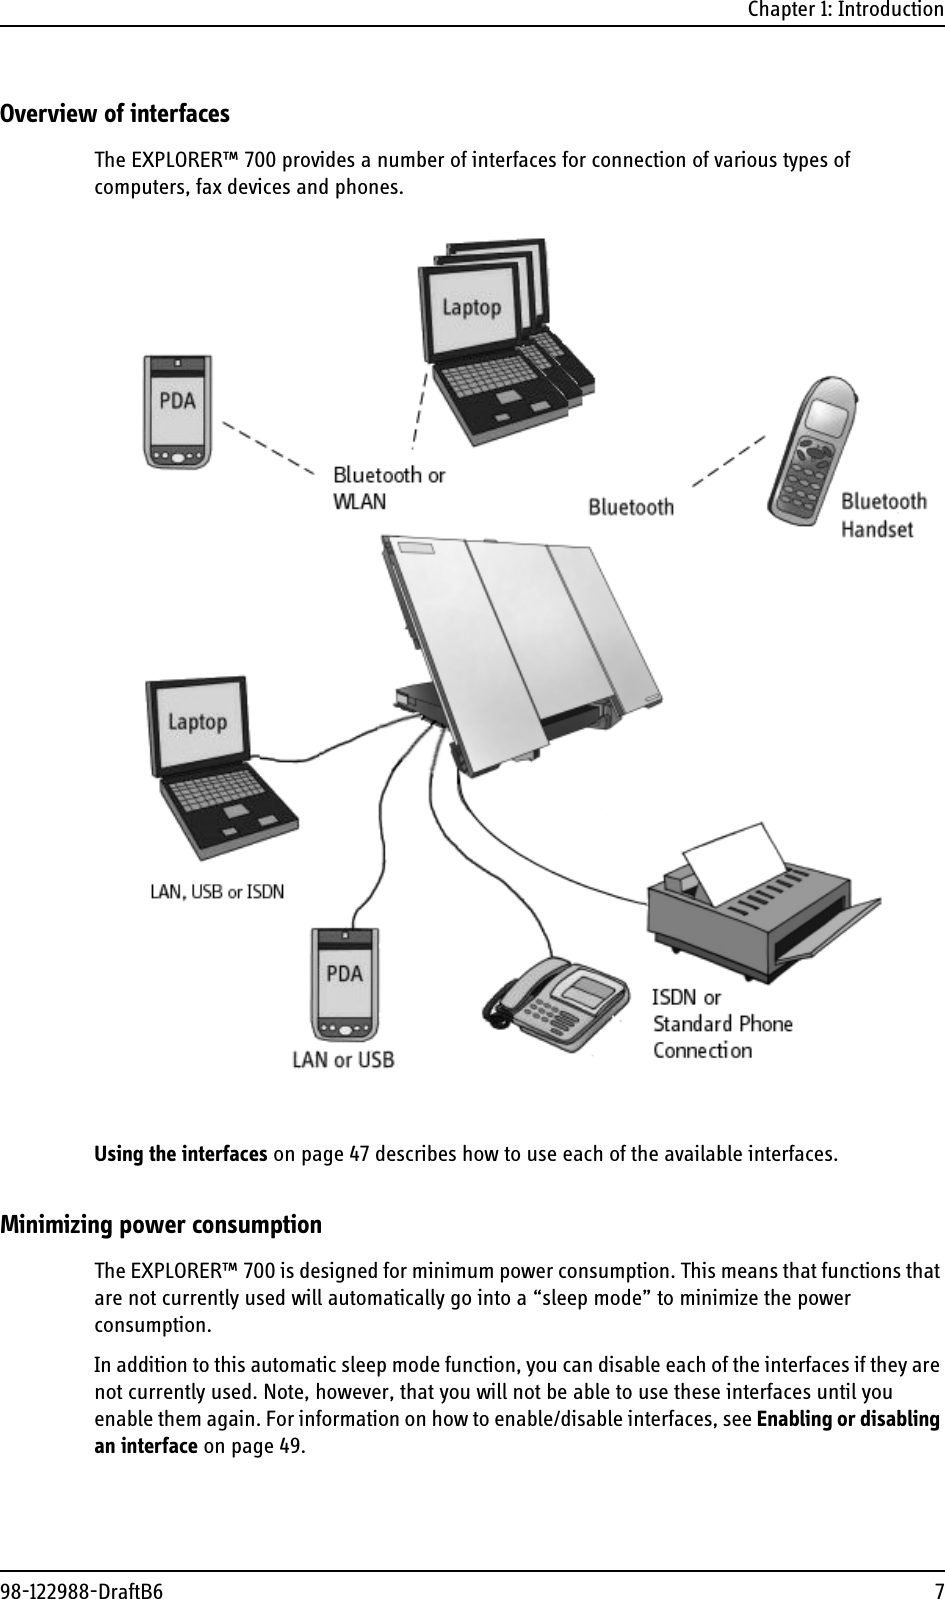 Chapter 1: Introduction98-122988-DraftB6 7Overview of interfacesThe EXPLORER™ 700 provides a number of interfaces for connection of various types of computers, fax devices and phones. Using the interfaces on page 47 describes how to use each of the available interfaces.Minimizing power consumptionThe EXPLORER™ 700 is designed for minimum power consumption. This means that functions that are not currently used will automatically go into a “sleep mode” to minimize the power consumption.In addition to this automatic sleep mode function, you can disable each of the interfaces if they are not currently used. Note, however, that you will not be able to use these interfaces until you enable them again. For information on how to enable/disable interfaces, see Enabling or disabling an interface on page 49.